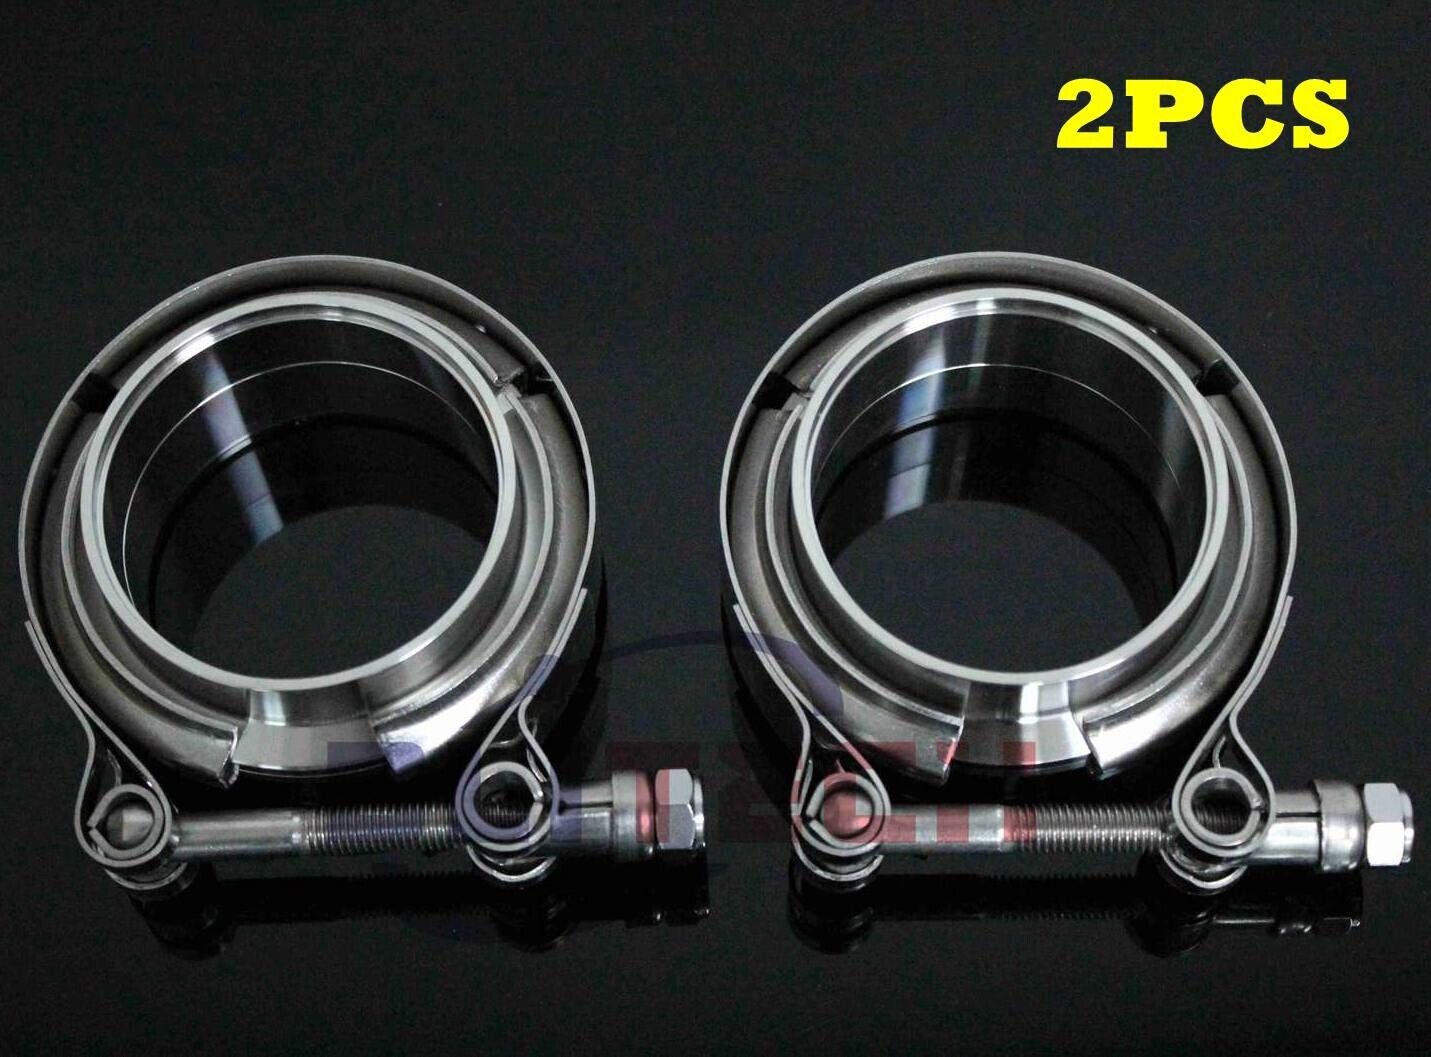 2PCS 2inch V-band clamp & 2” Stainless Male/Female Flange Kit exhaust downpipe